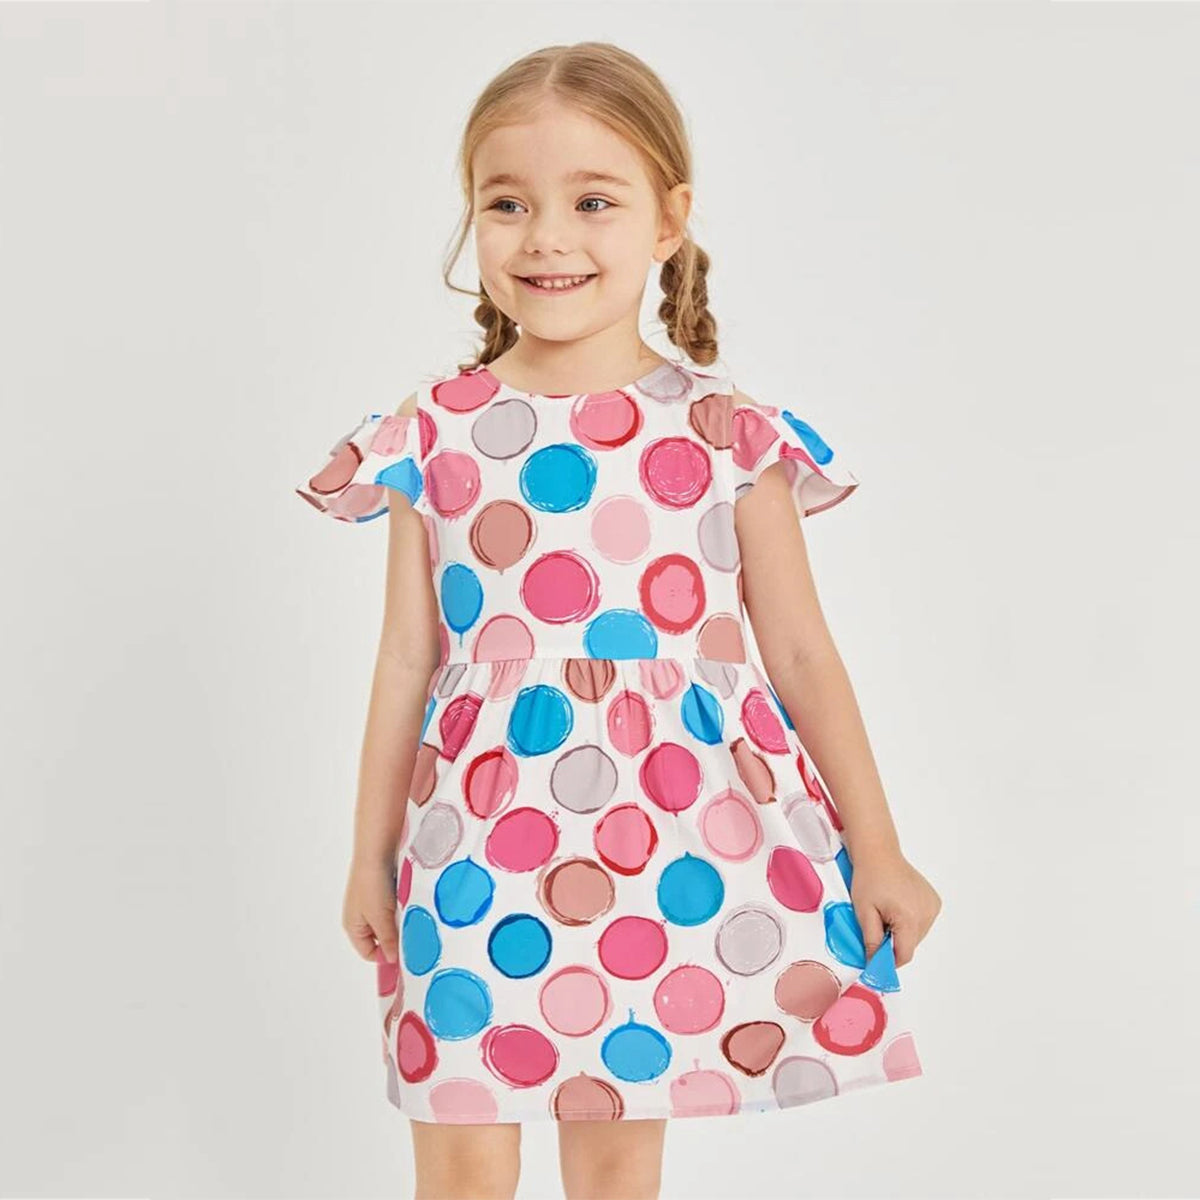 Kids New Fashion Multicolor Round Frock & Dress for Baby Girls.